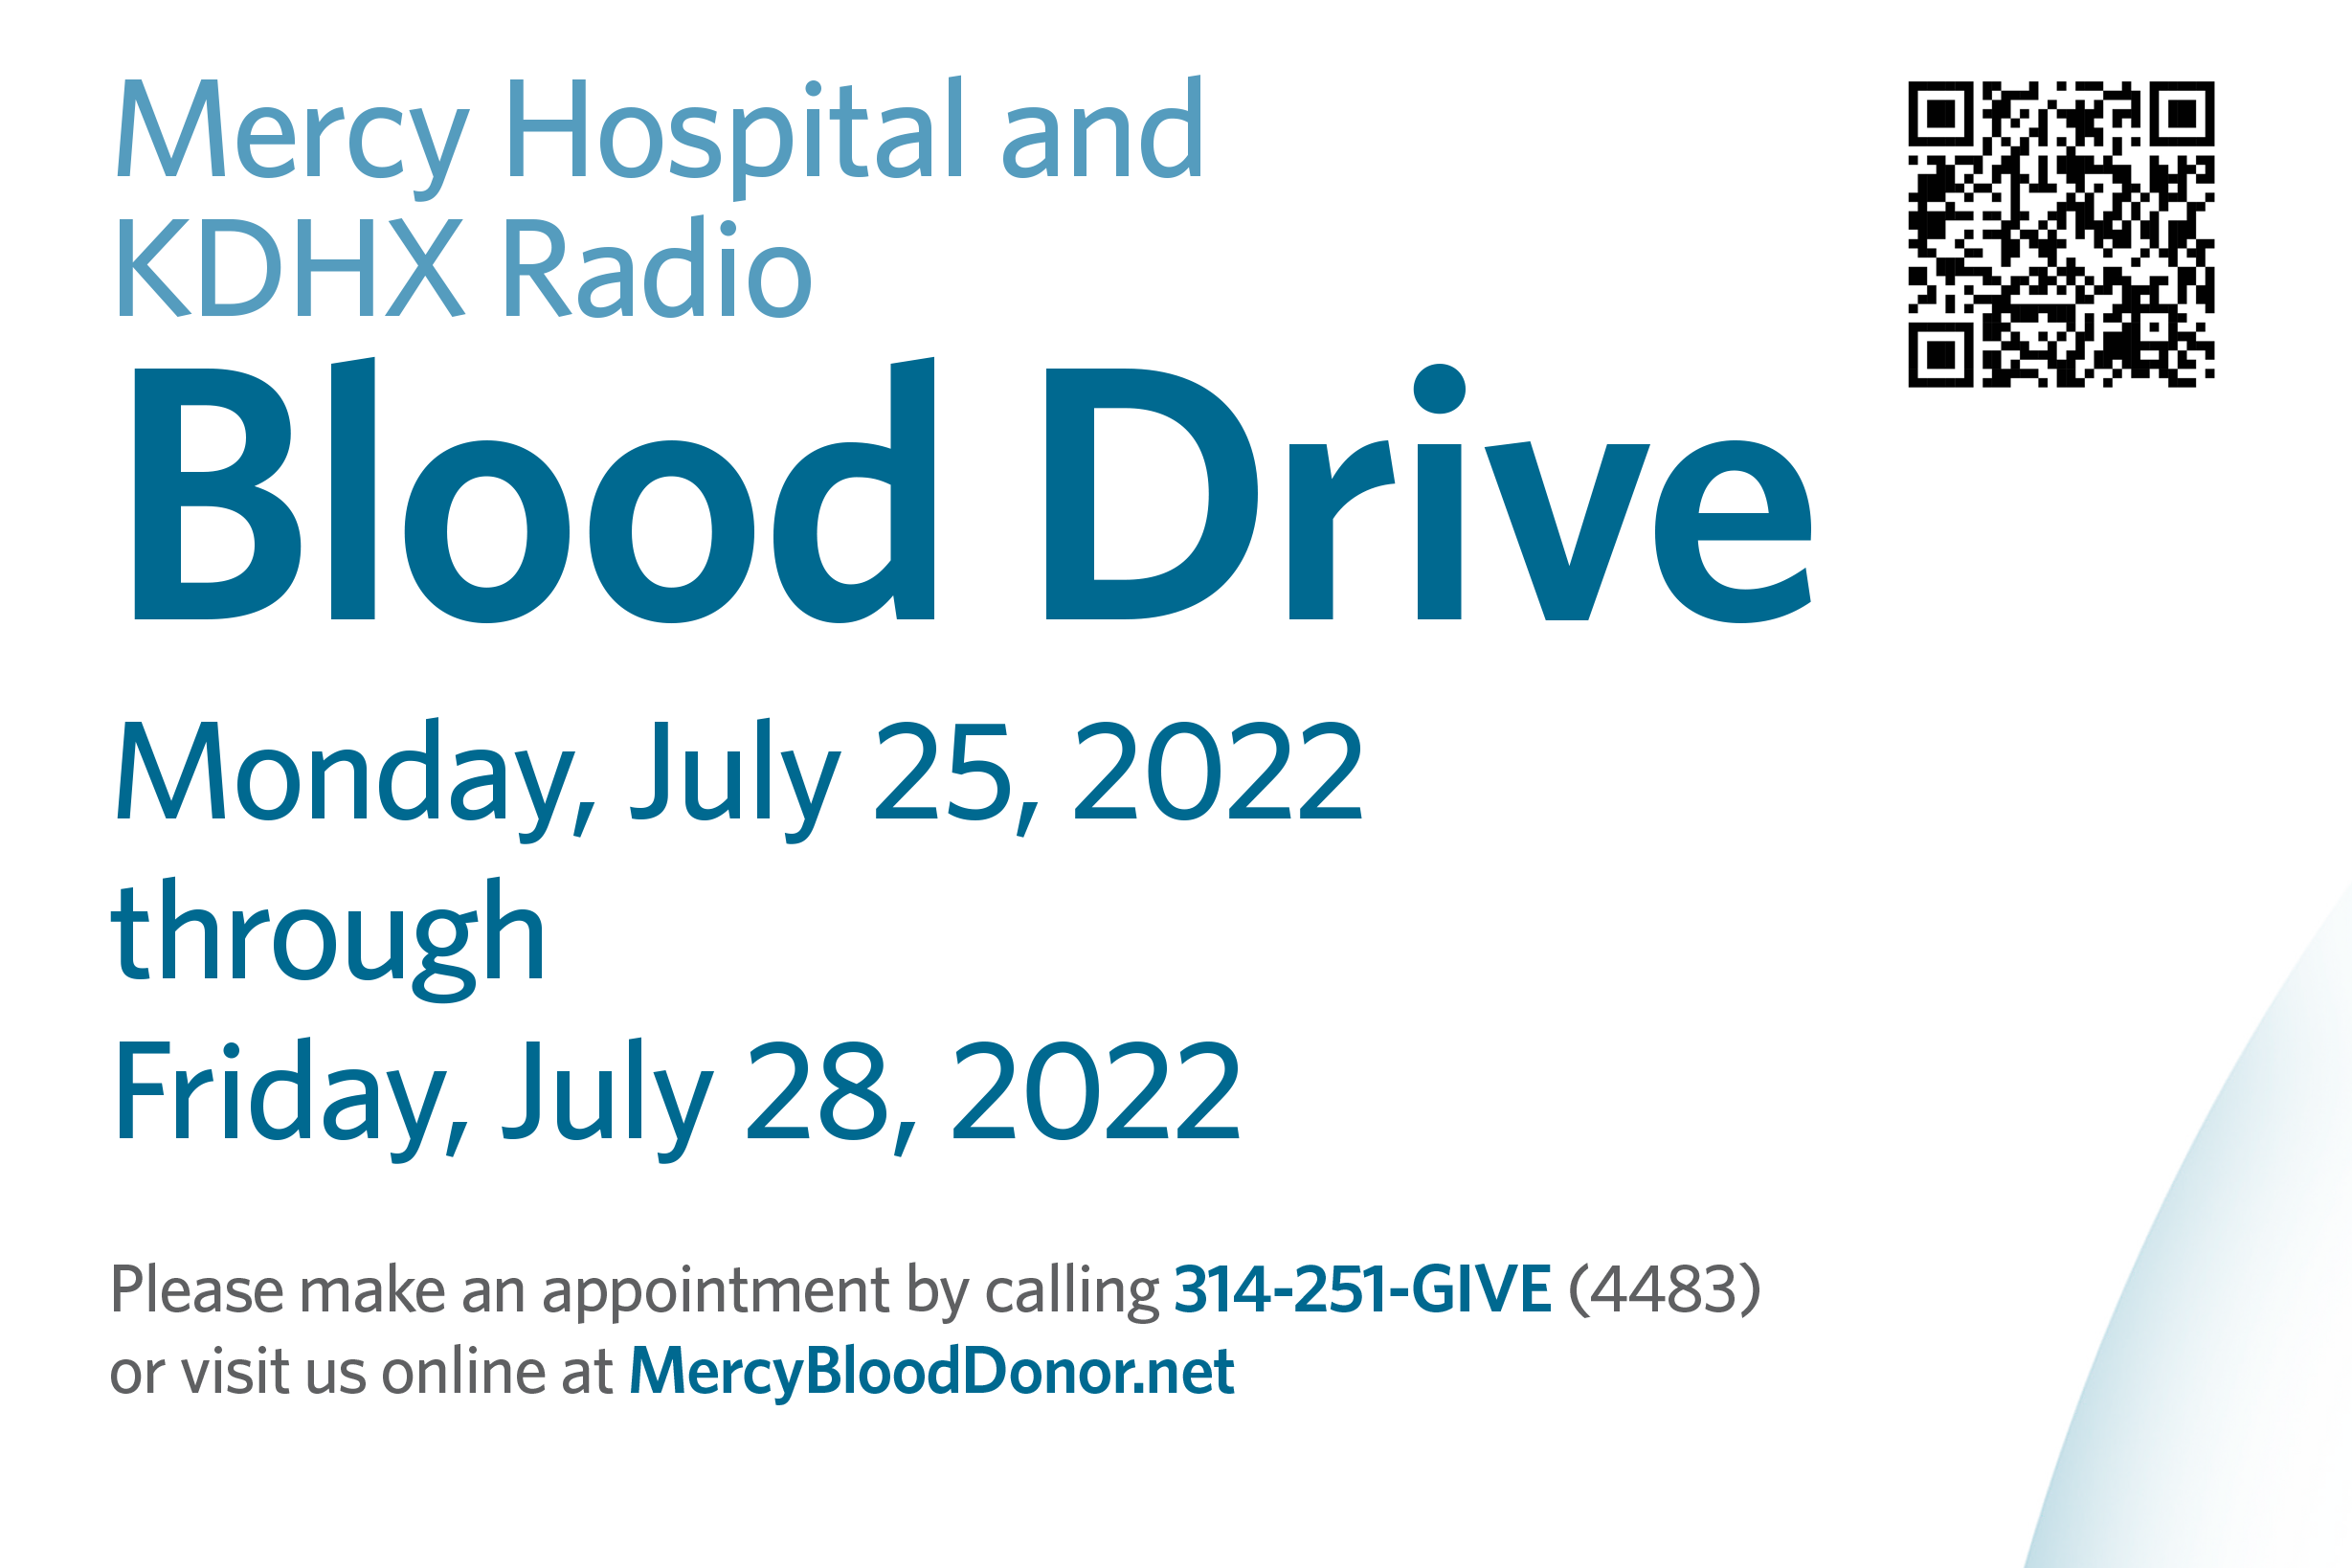 The Mercy Hospital St. Louis and KDHX community Blood Drive runs Friday, July 15th through Friday, July 29th.